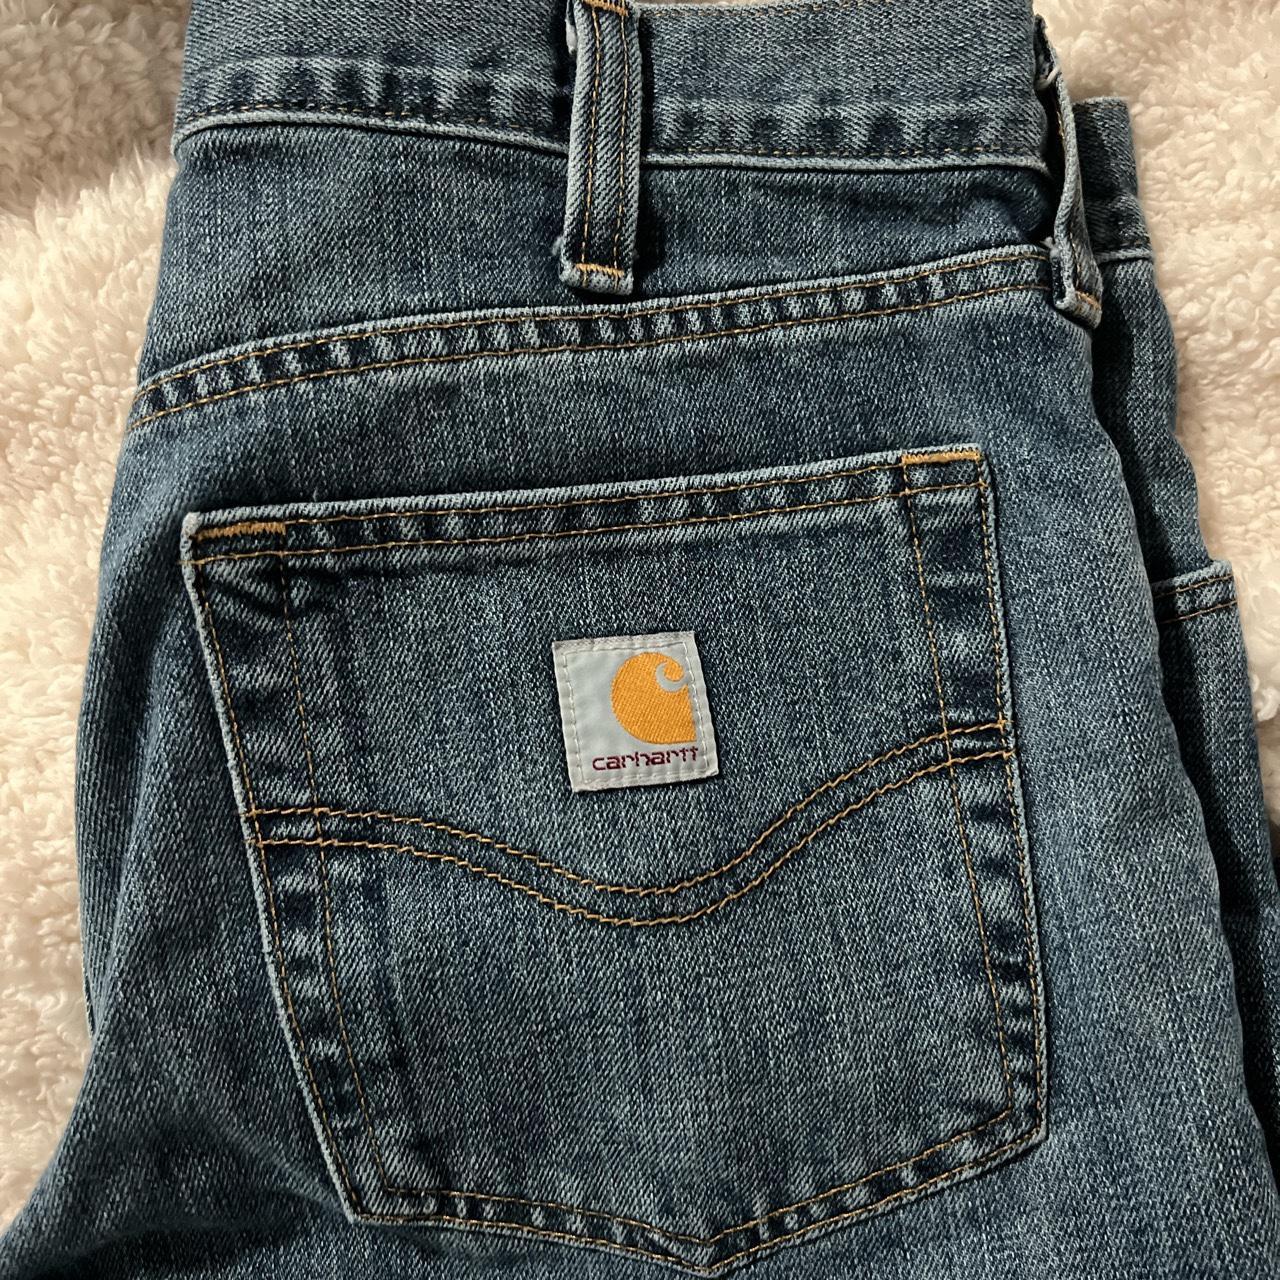 Carhartt Relaxed Fit Jeans#N##N#(not too sure on the... - Depop